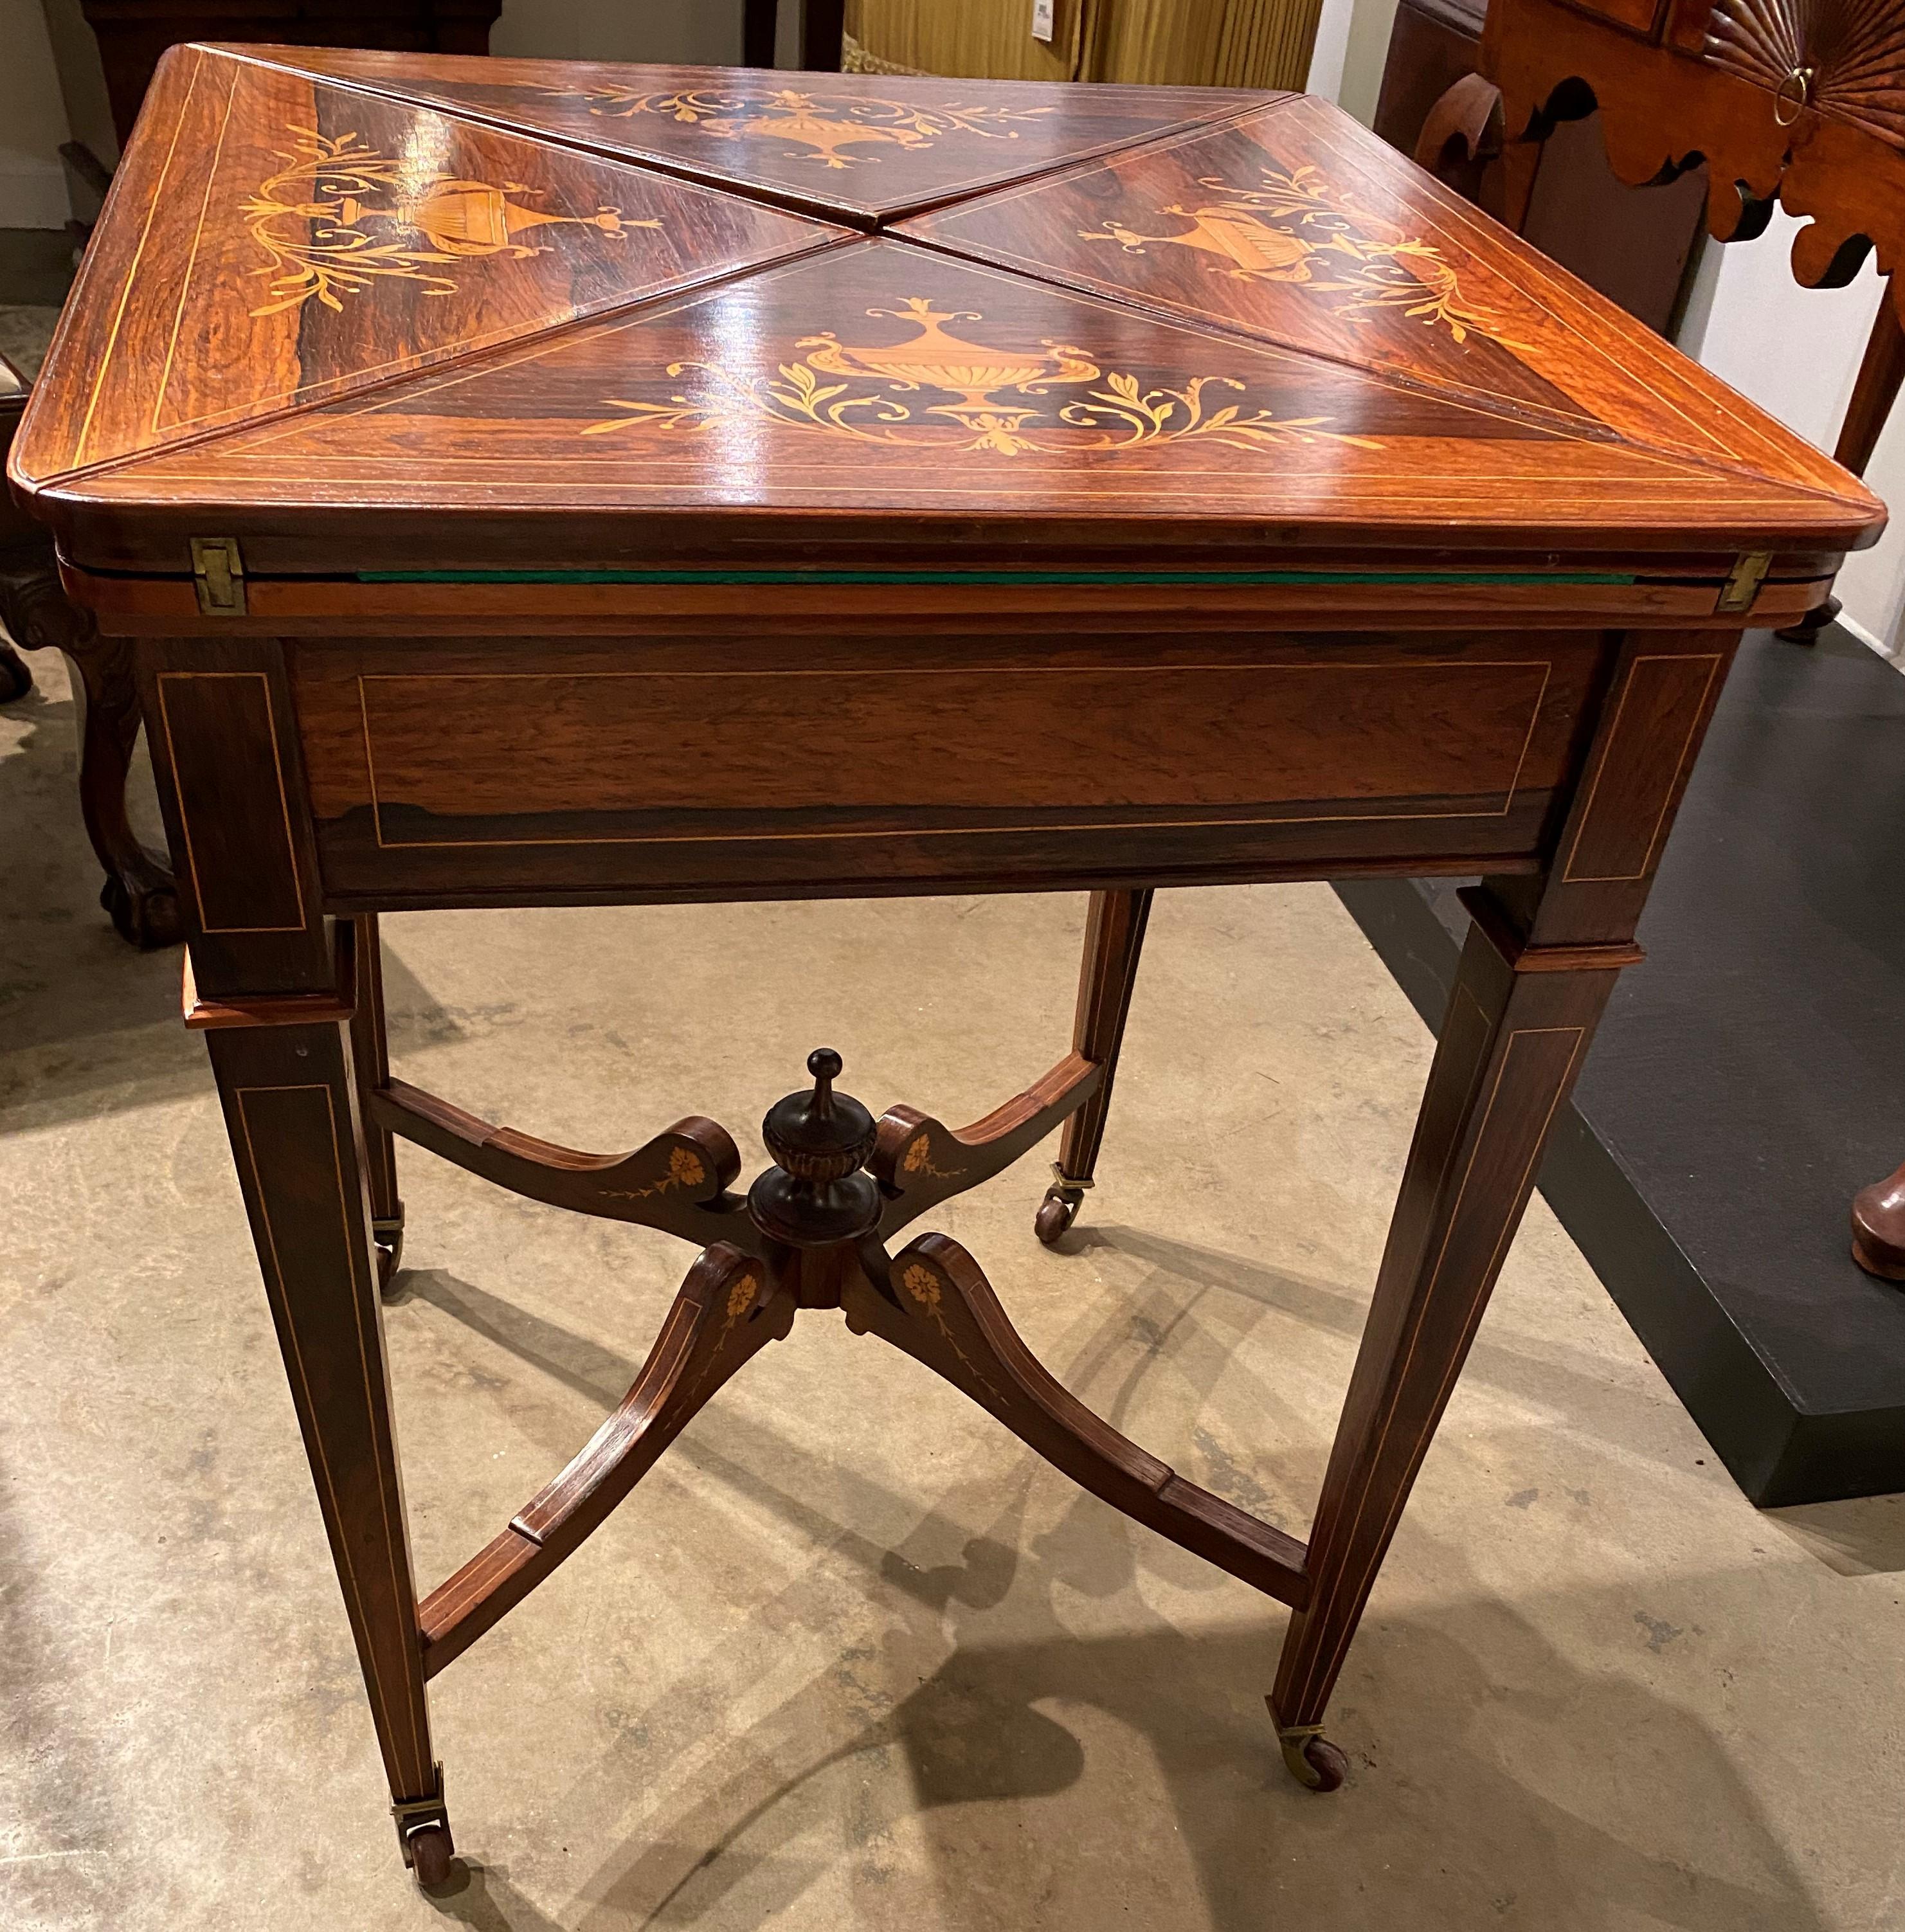 Hand-Carved Late 19th Century English Handkerchief Gaming Table with Exceptional Inlay